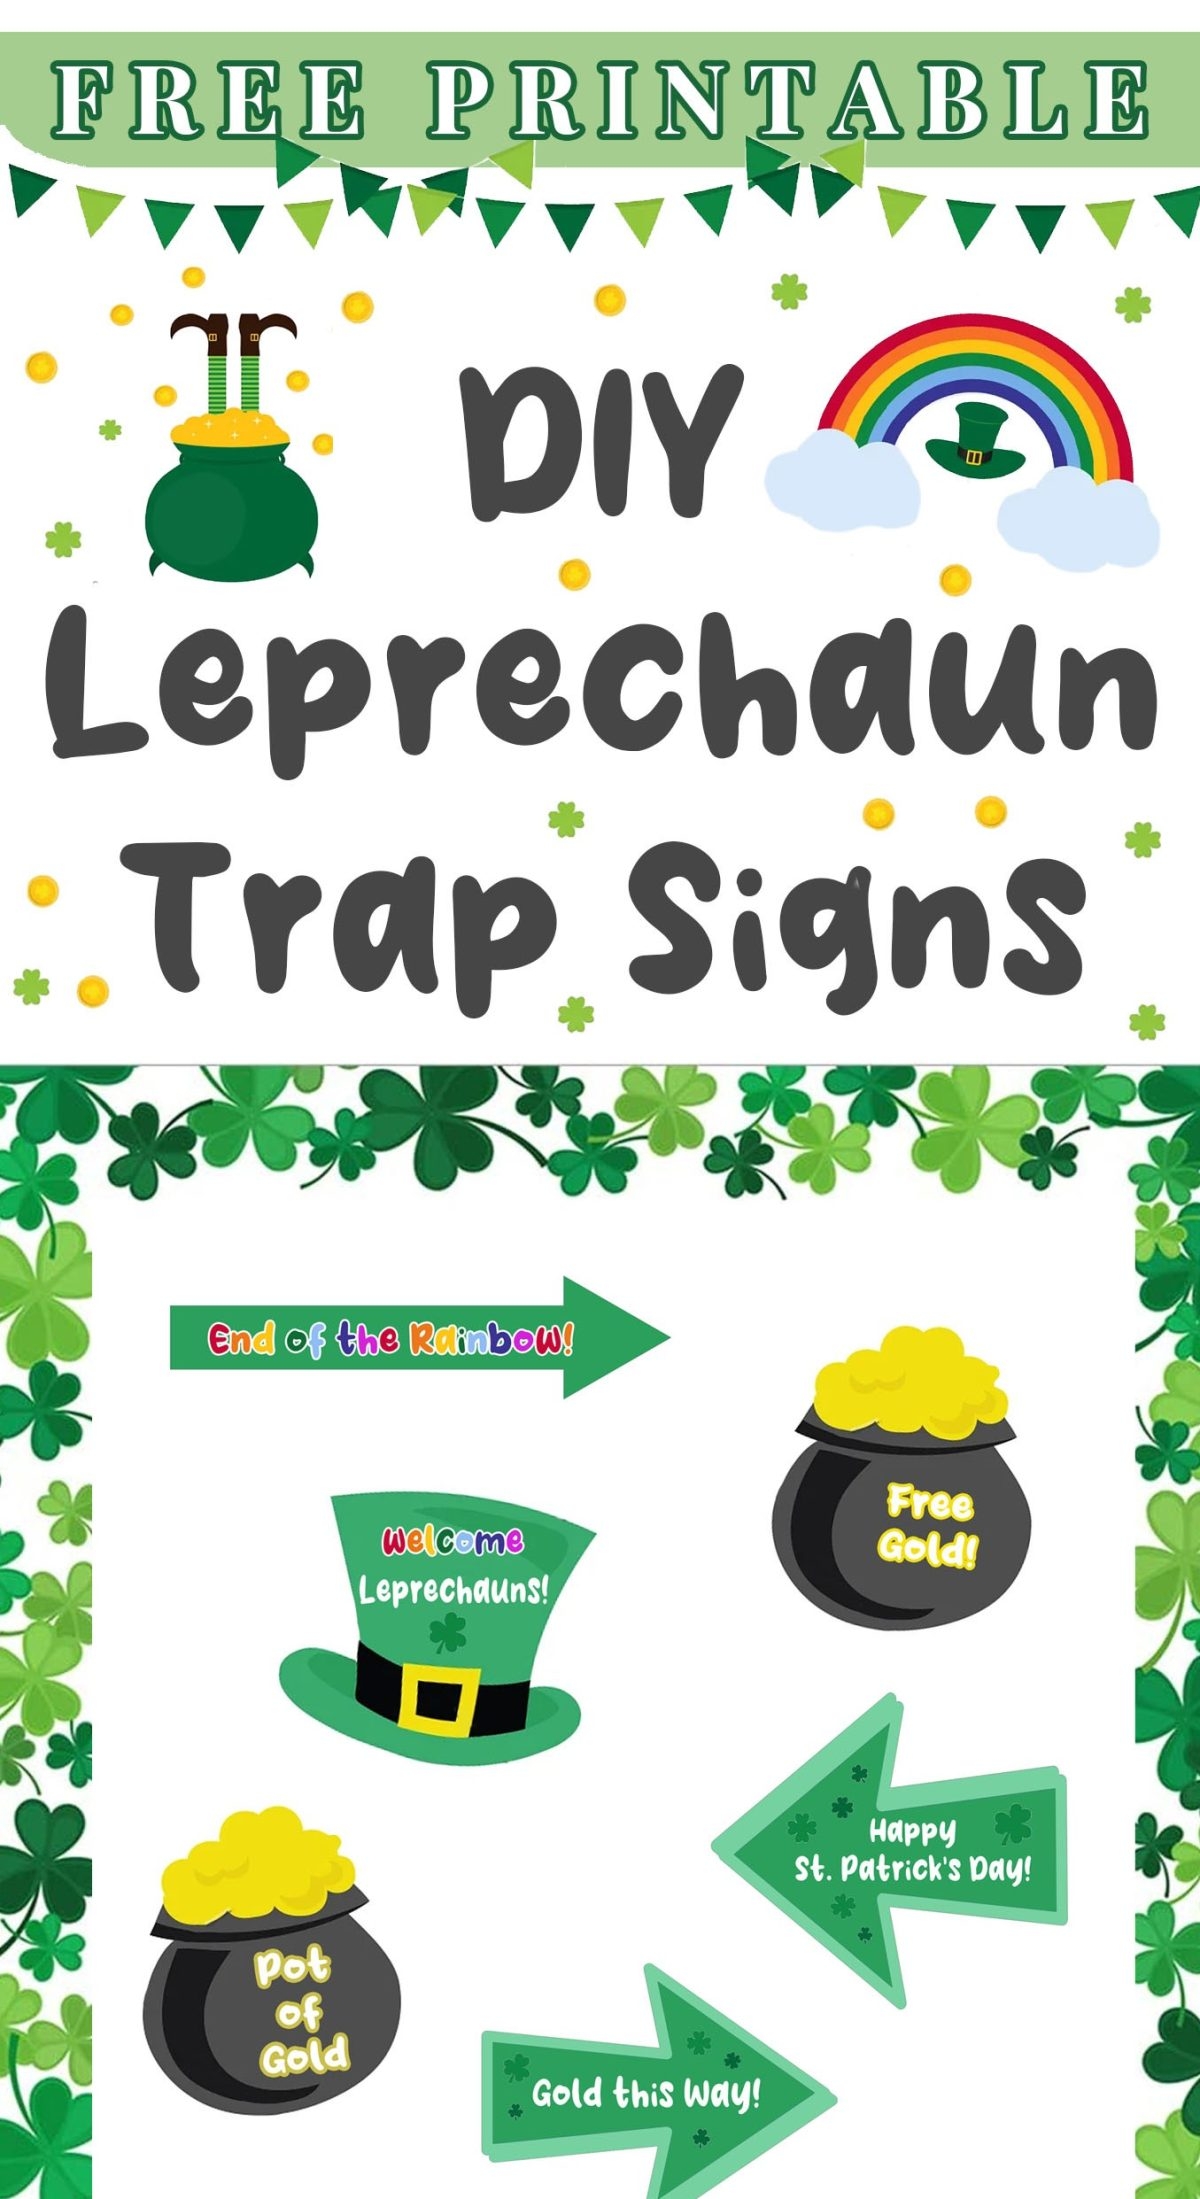 DIY Leprechaun Trap Signs Free St Patrick s Day Printables For The Love Of Food